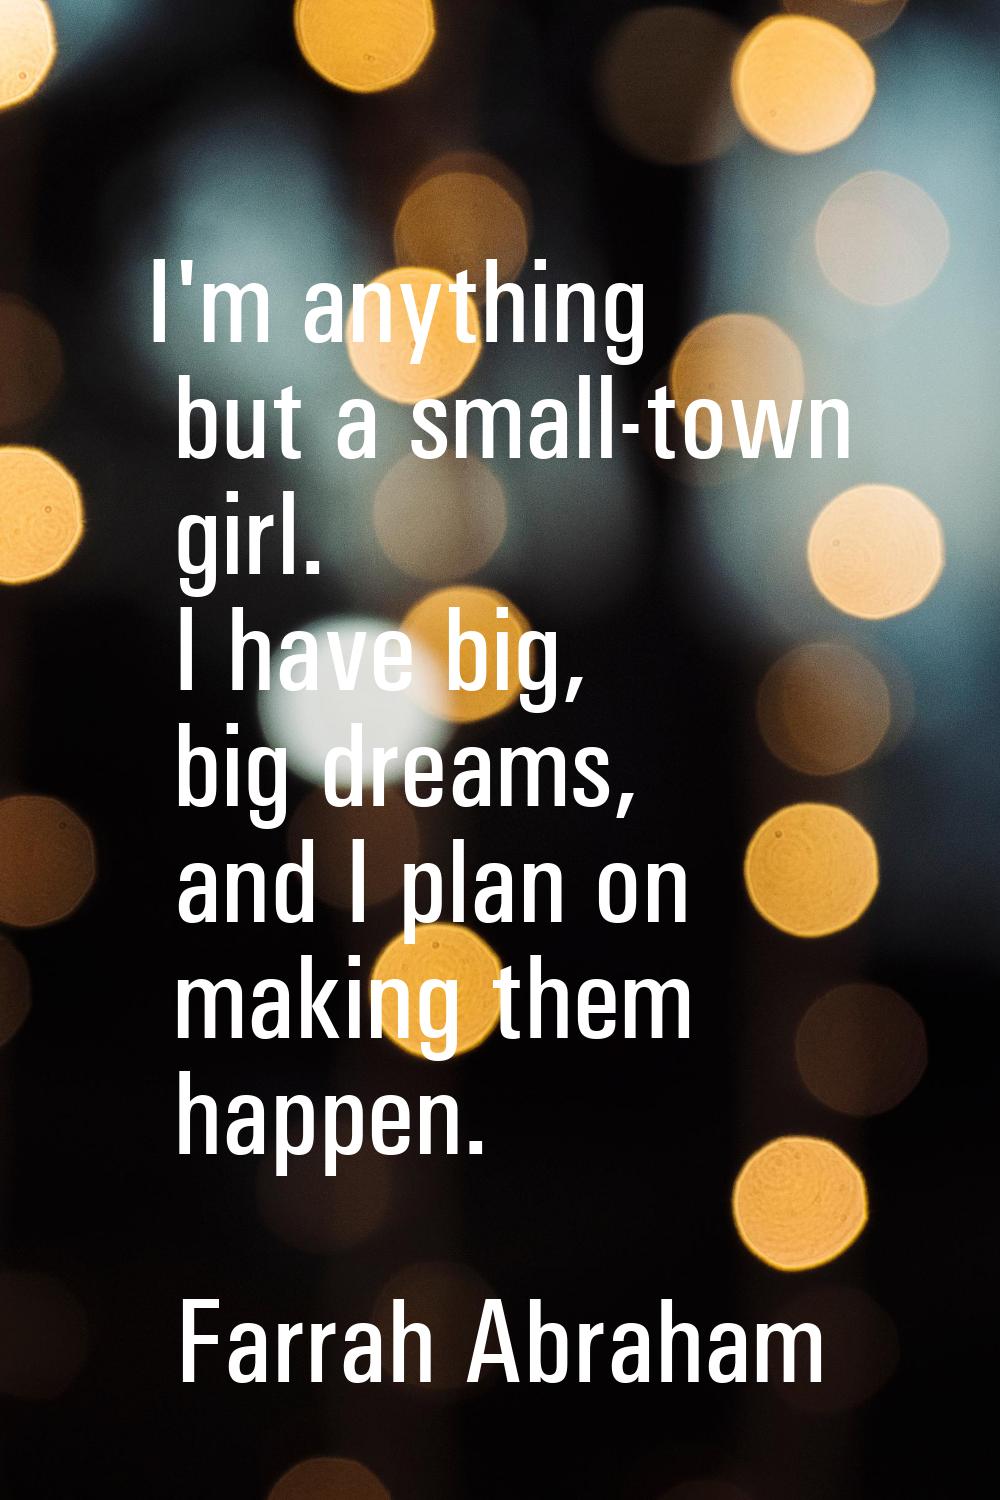 I'm anything but a small-town girl. I have big, big dreams, and I plan on making them happen.